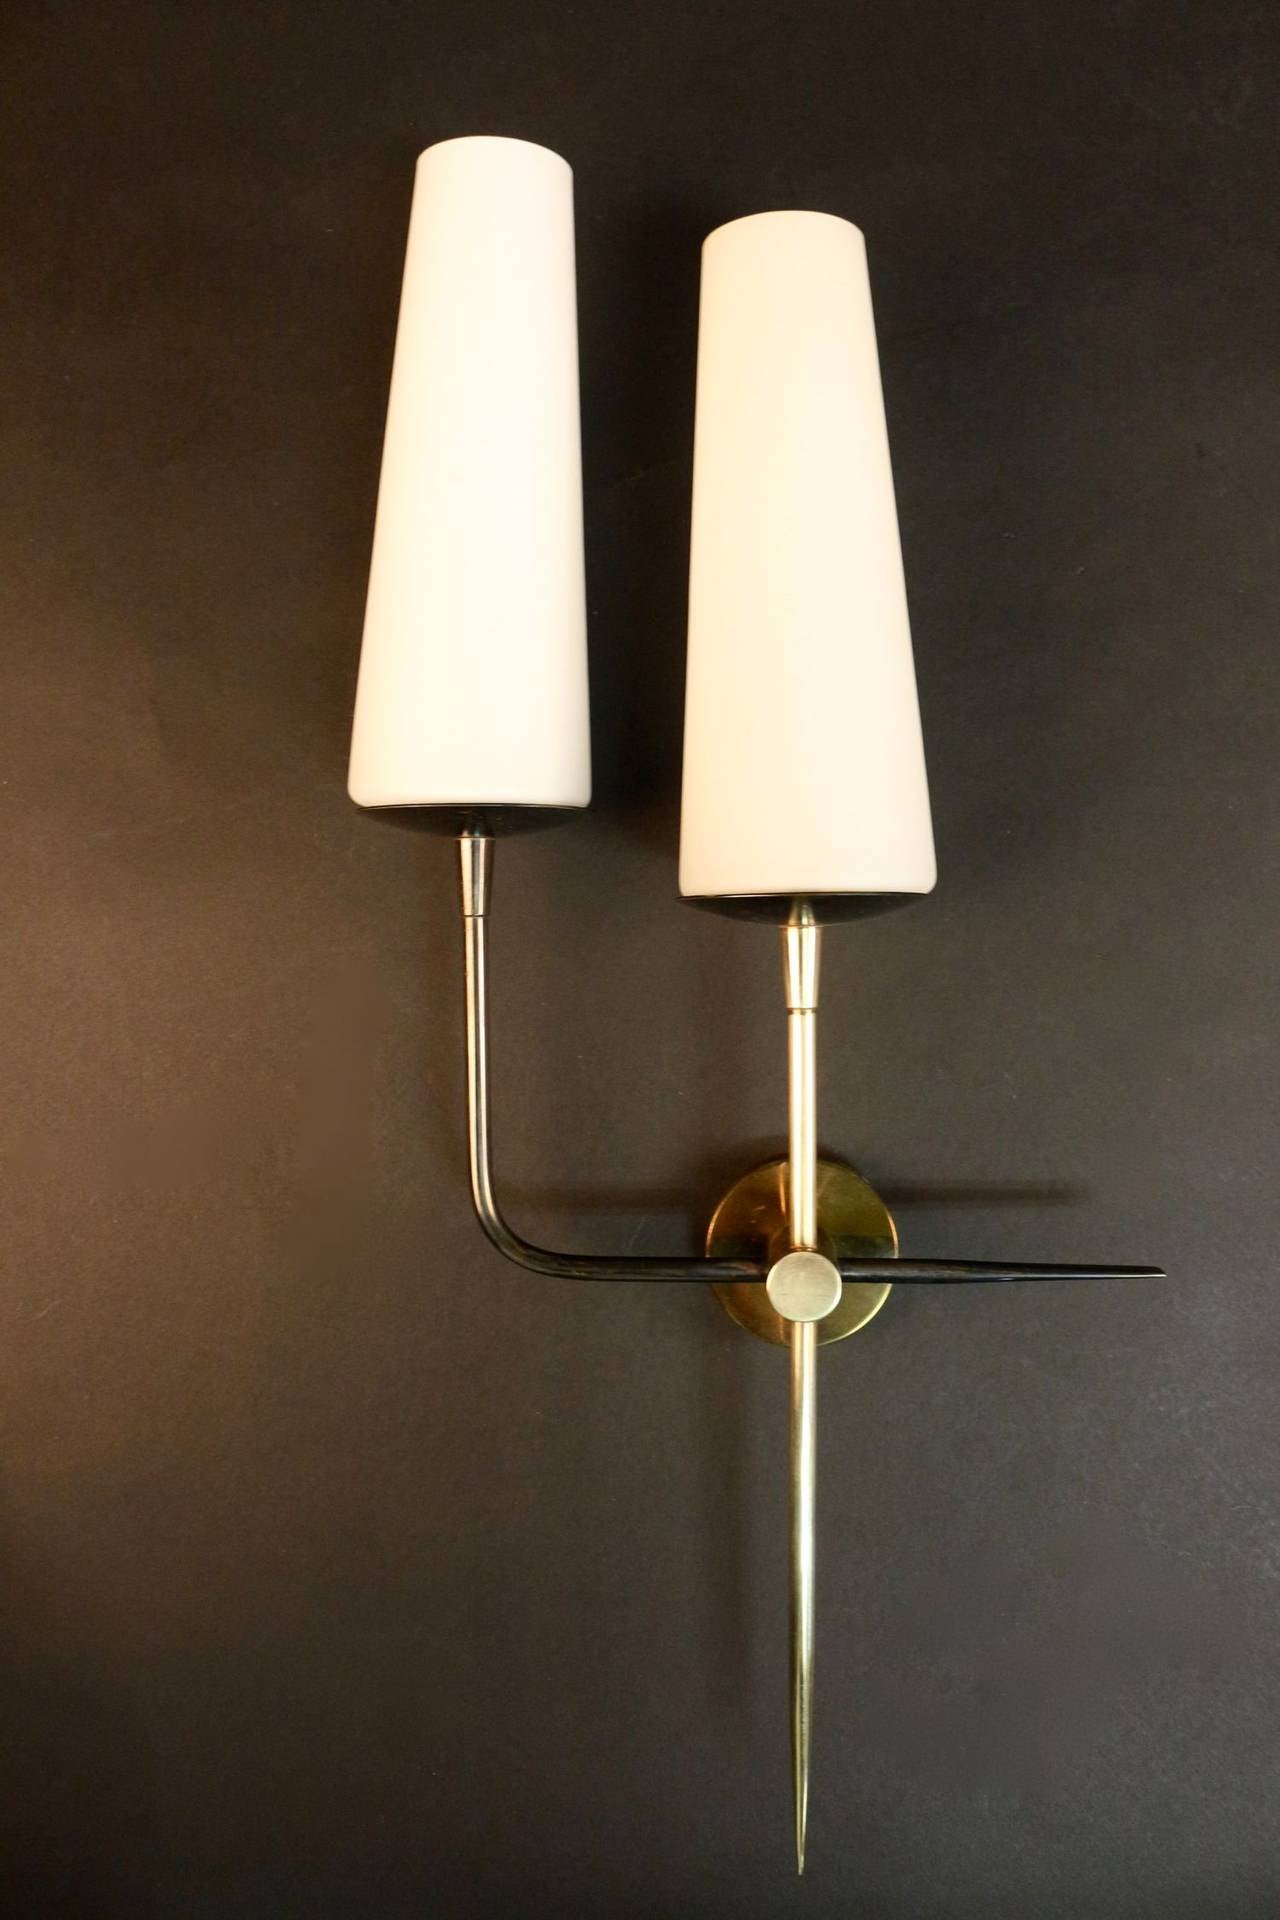 Pair of 1950s asymmetrical sconces by Maison Arlus. Gilt and 'canon de fusil' brass. Two lights per sconce decorated with opalins.